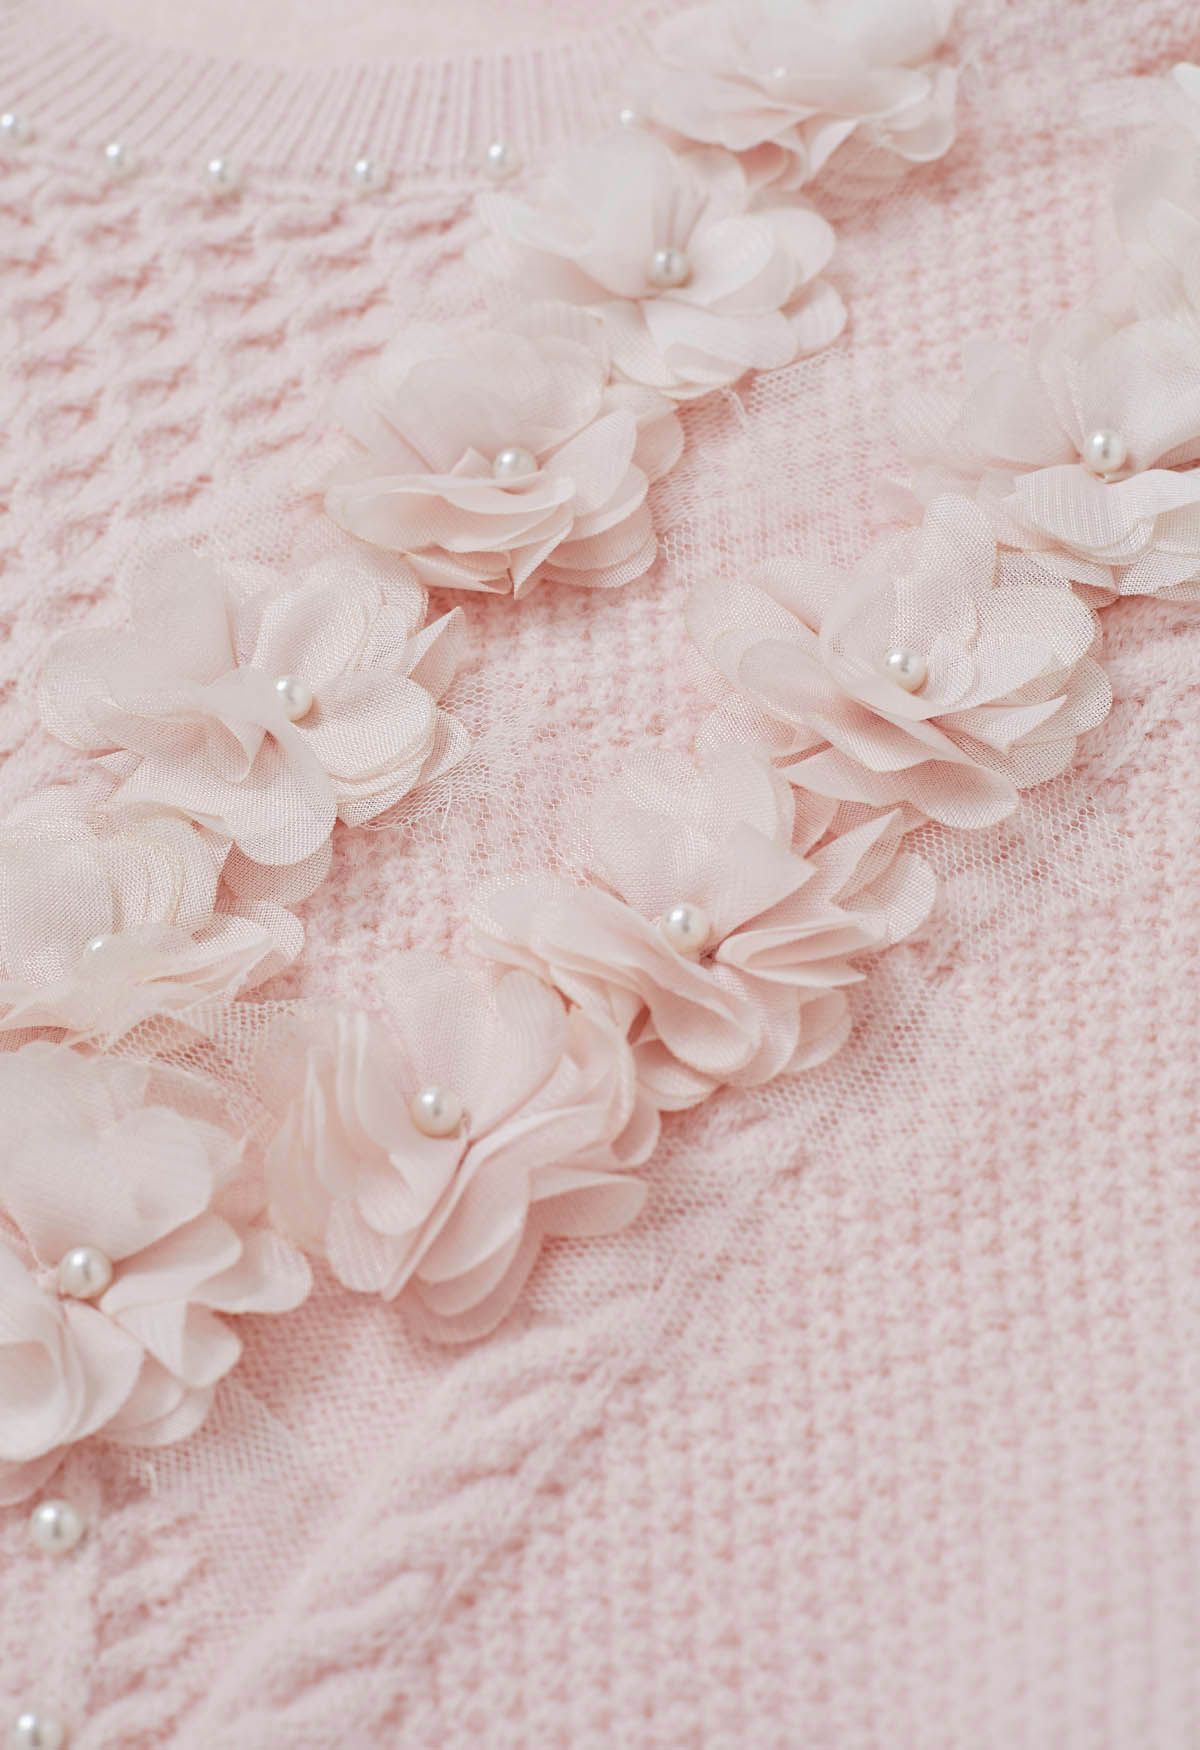 3D Flower Pearly Knit Sweater in Pink